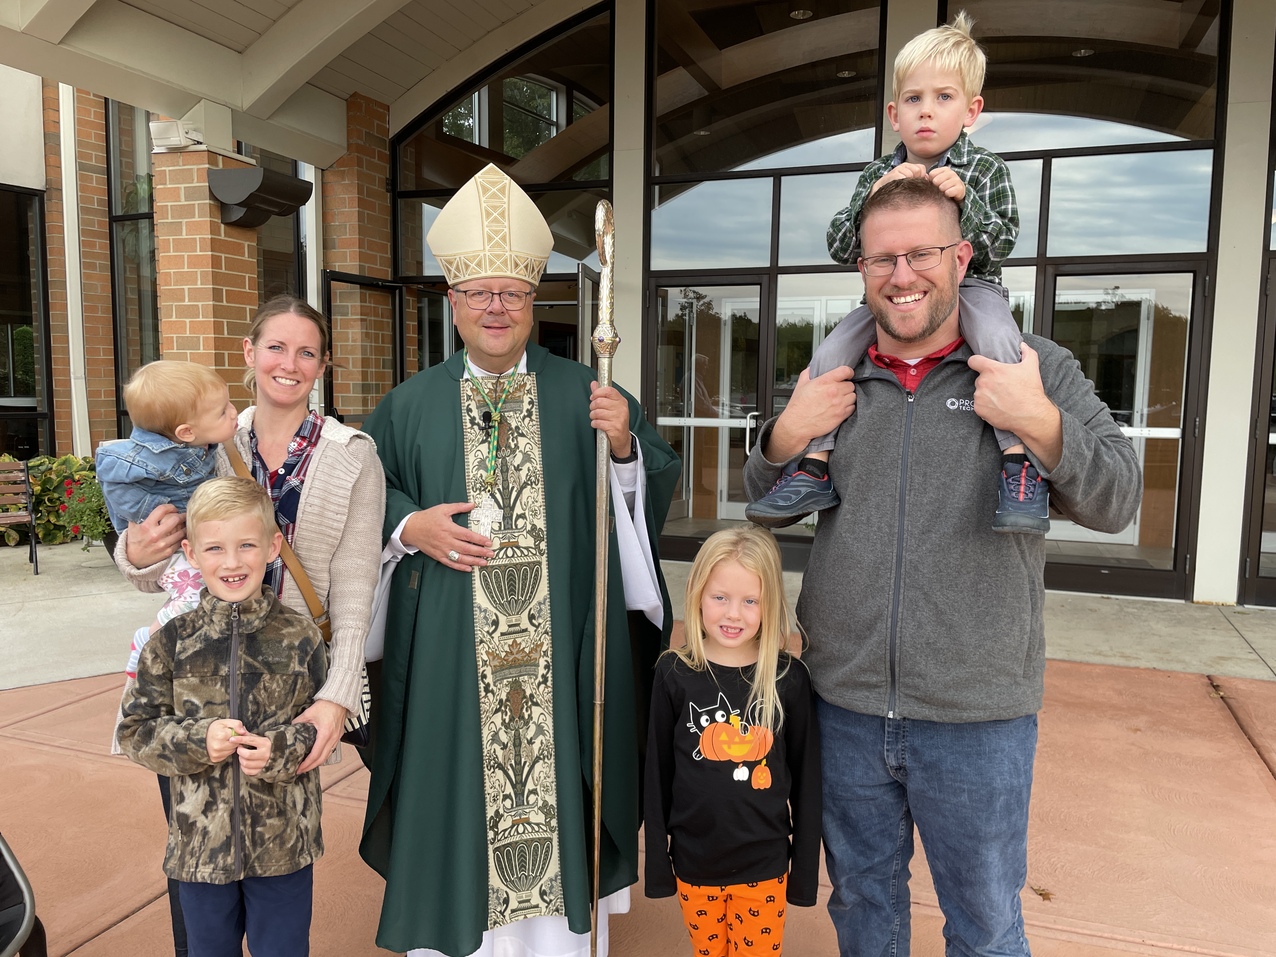 St. John Vianney parishioners mark Founders’ Day and more during bishop’s visit